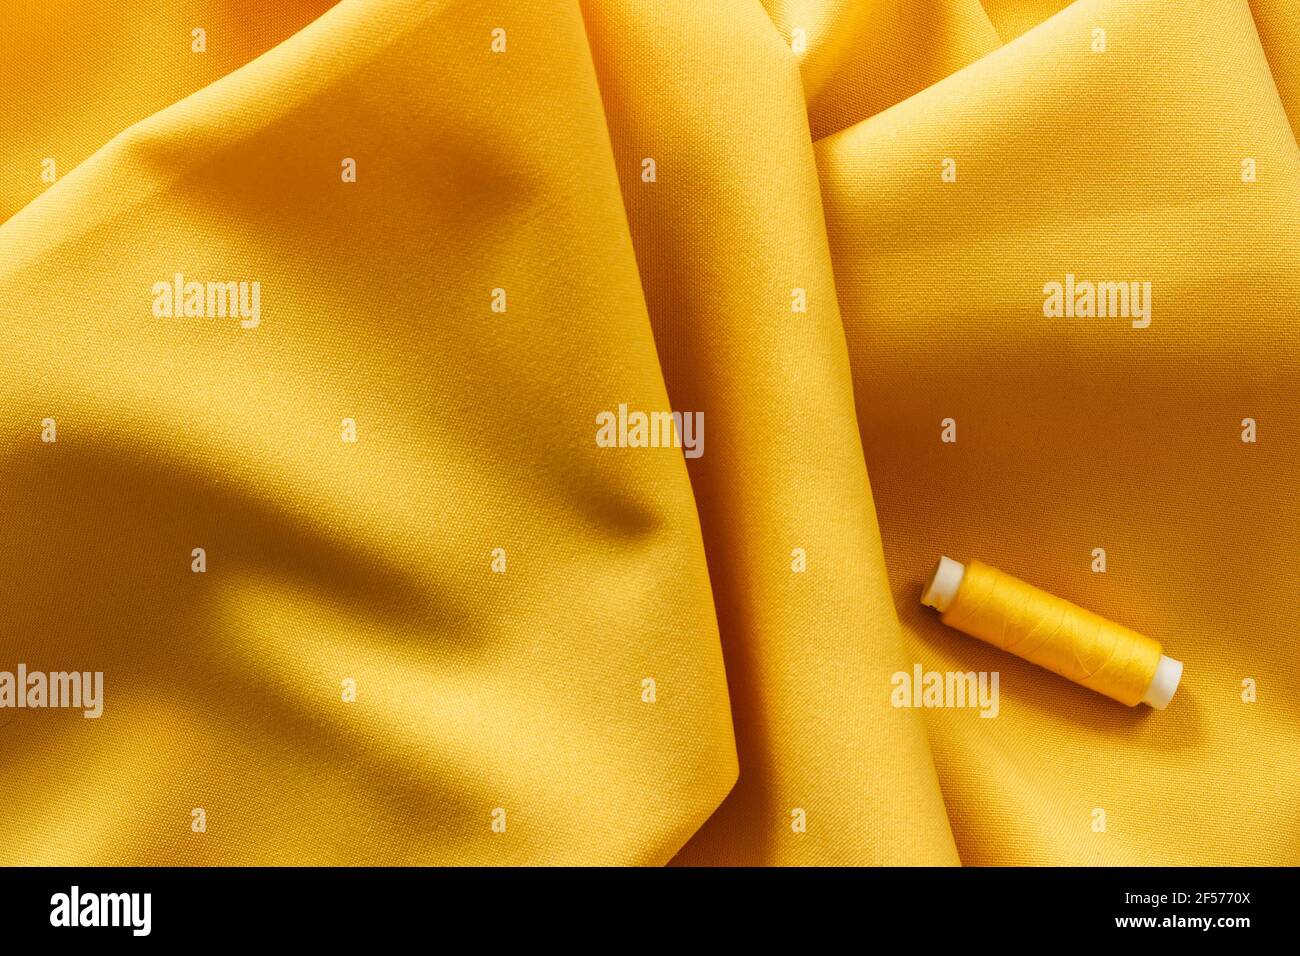 Yellow fabric texture and sewing thread.Spring color.Abstract yellow background. Smooth elegant golden textile. Trendy Color of the Year 2021. Color Stock Photo